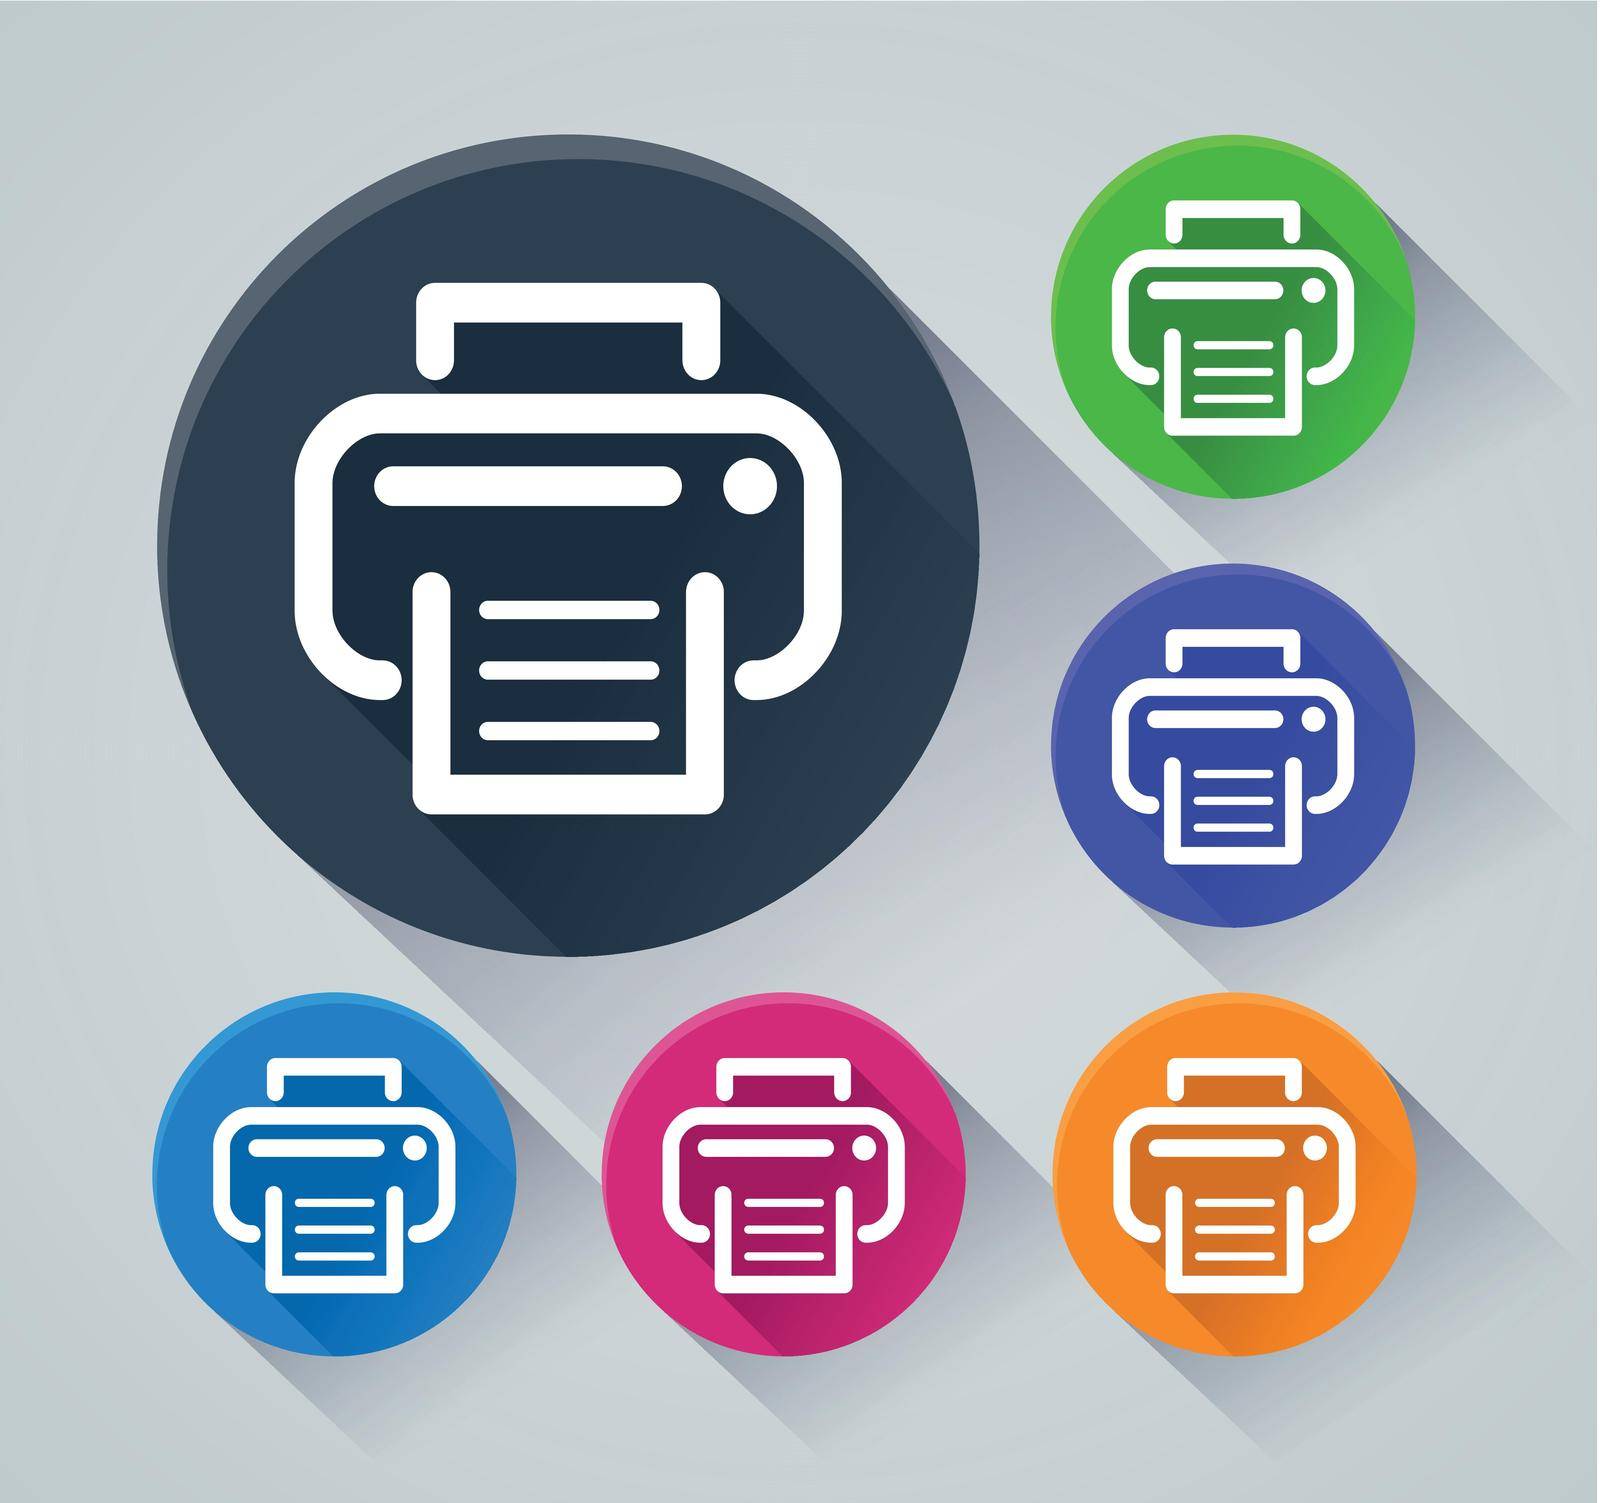 printer circle icons with shadow by Francois_Poirier